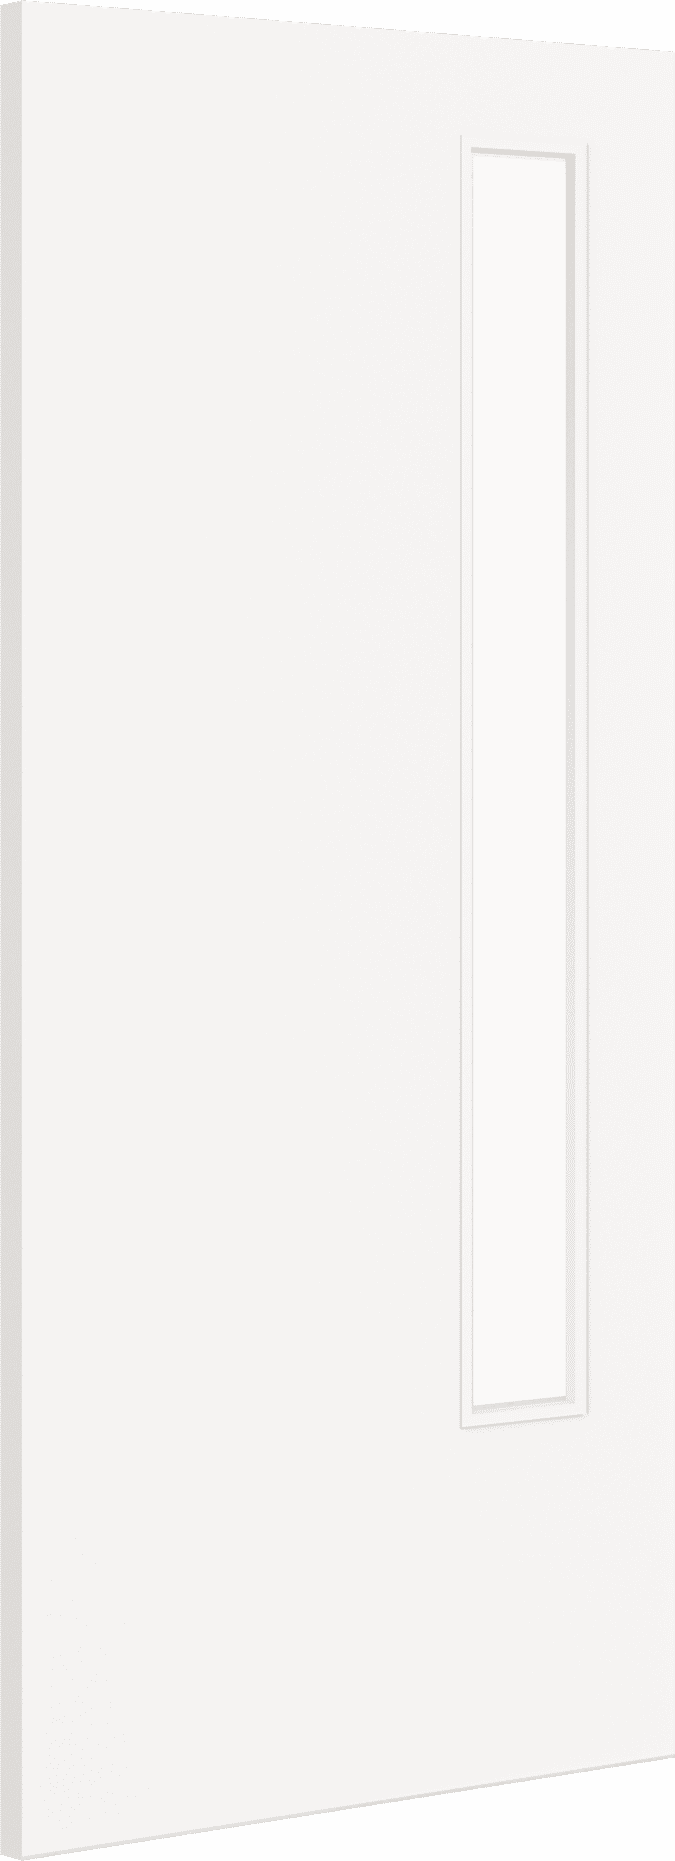 1981mm x 762mm x 44mm (30") Architectural Paint Grade White 13 Frosted Glazed Fire Door Blank